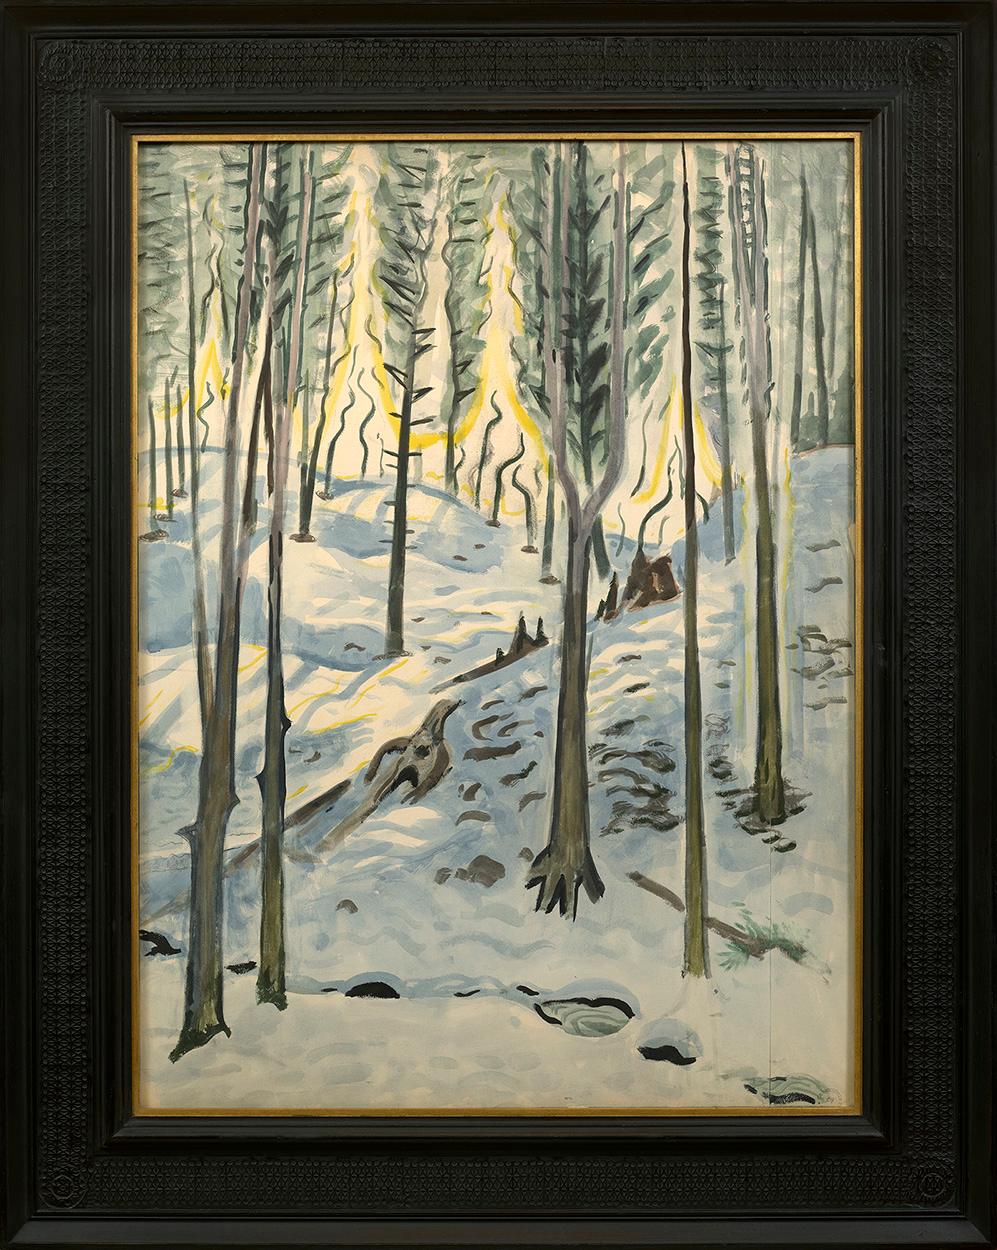 Fires of Spring in Big Woods - Art by Charles E. Burchfield